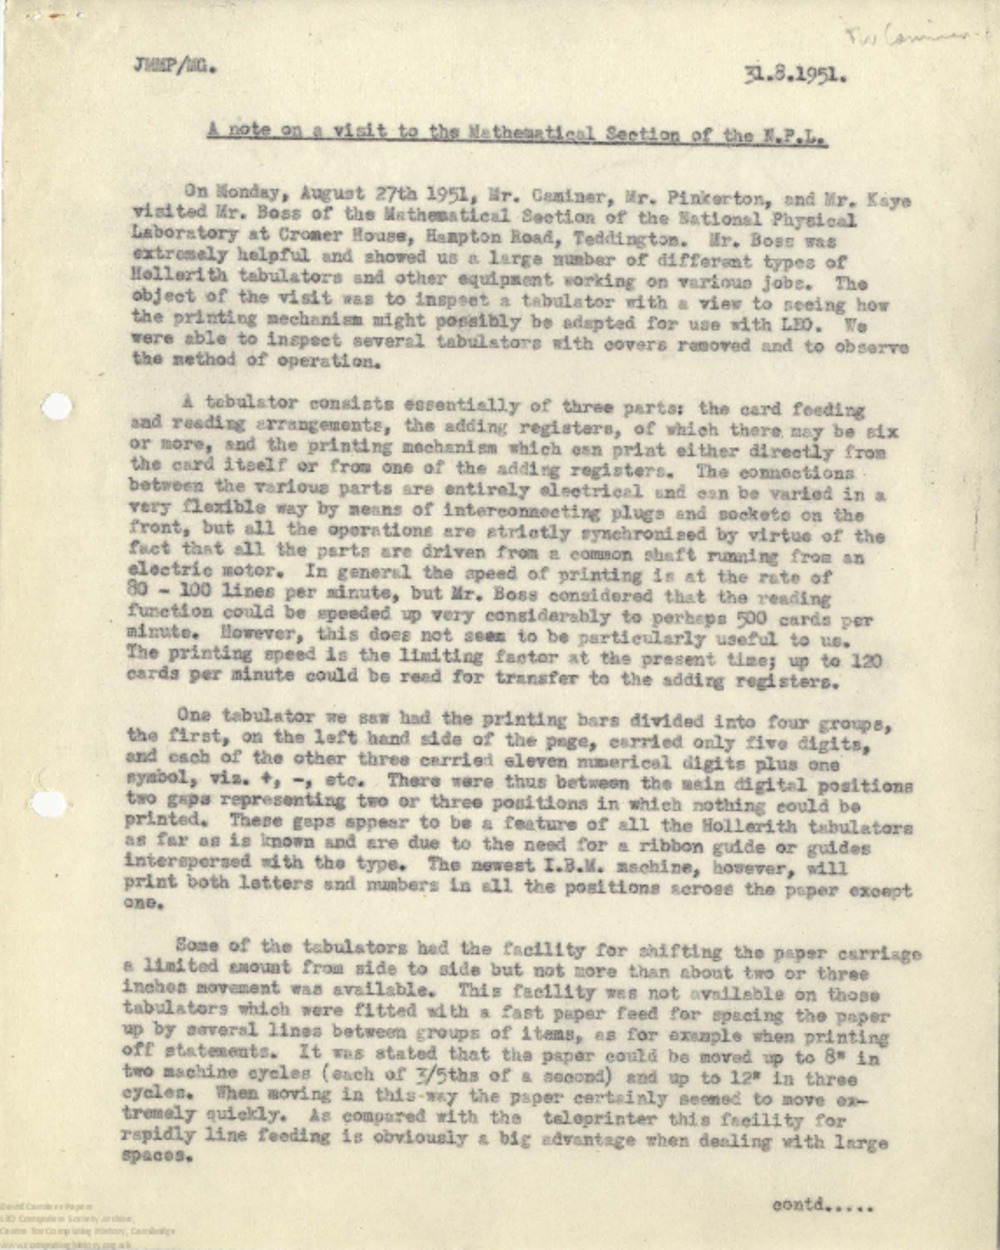 Article: 63074 A Note on a Visit to the Mathematical Section of the NPL, August 1951